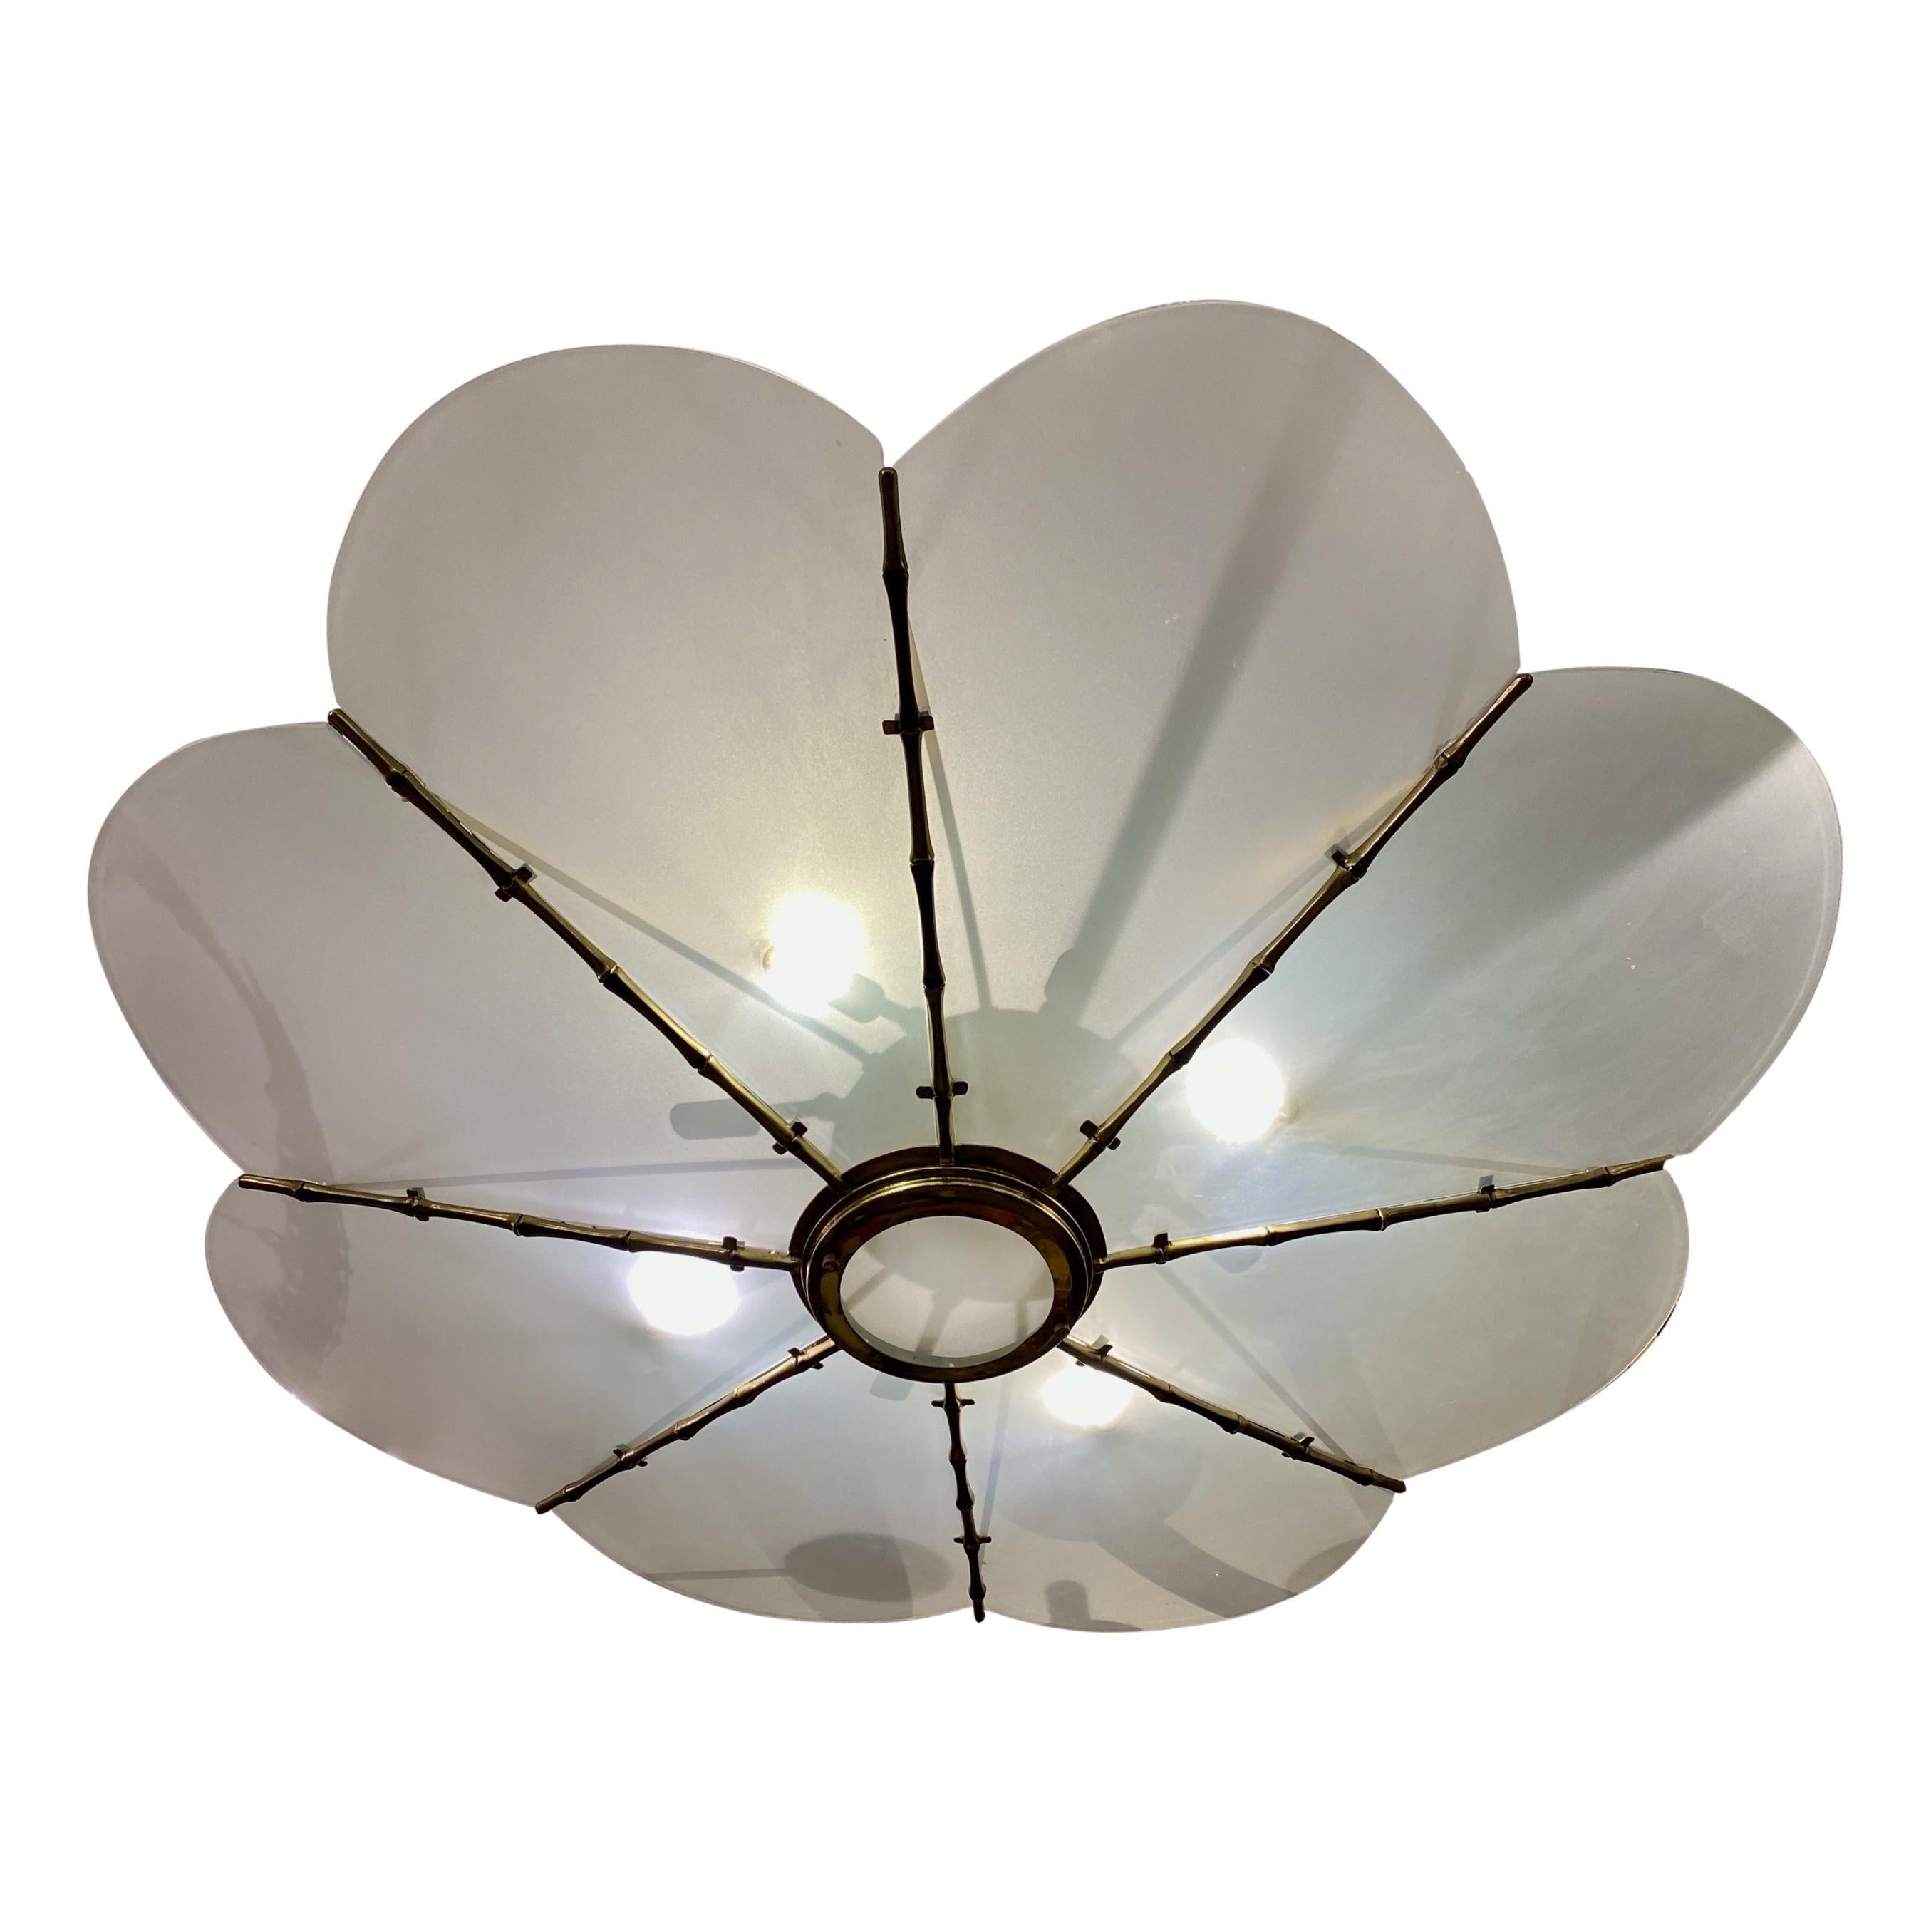 Mid-20th Century Large Gilt Metal Light Fixture with Glass Insets For Sale